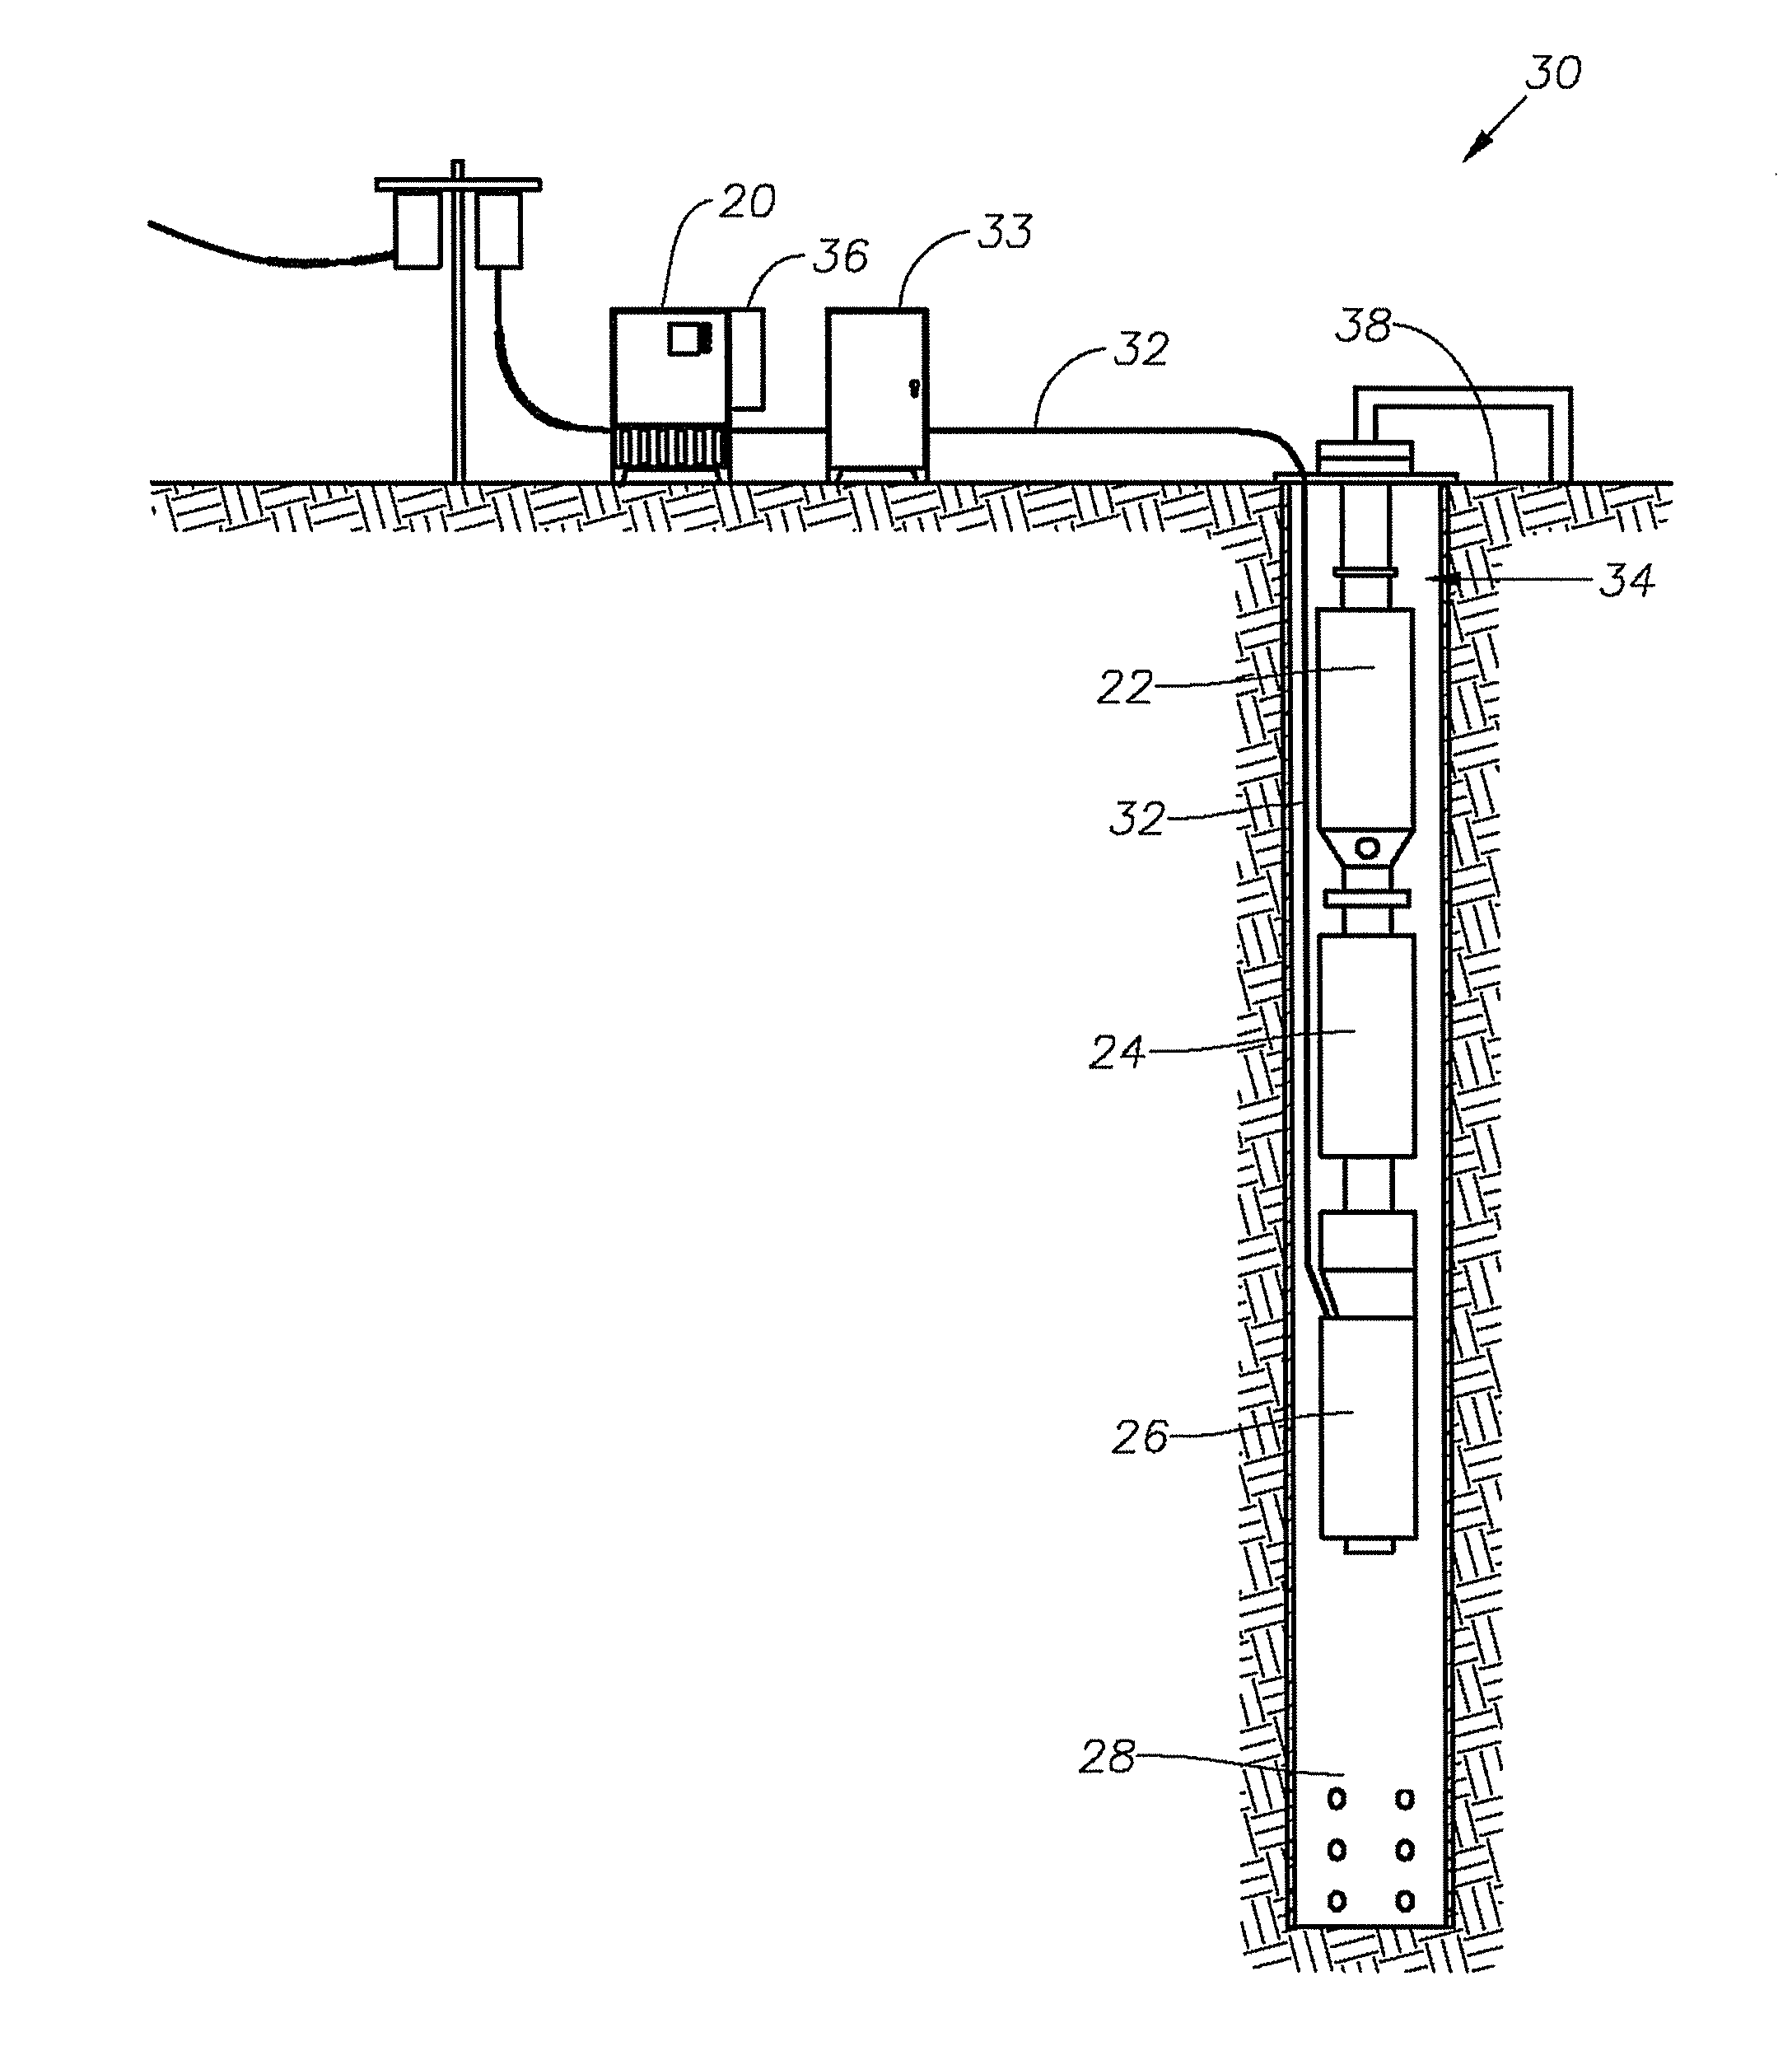 System, method and program product for cable loss compensation in an electrical submersible pump system